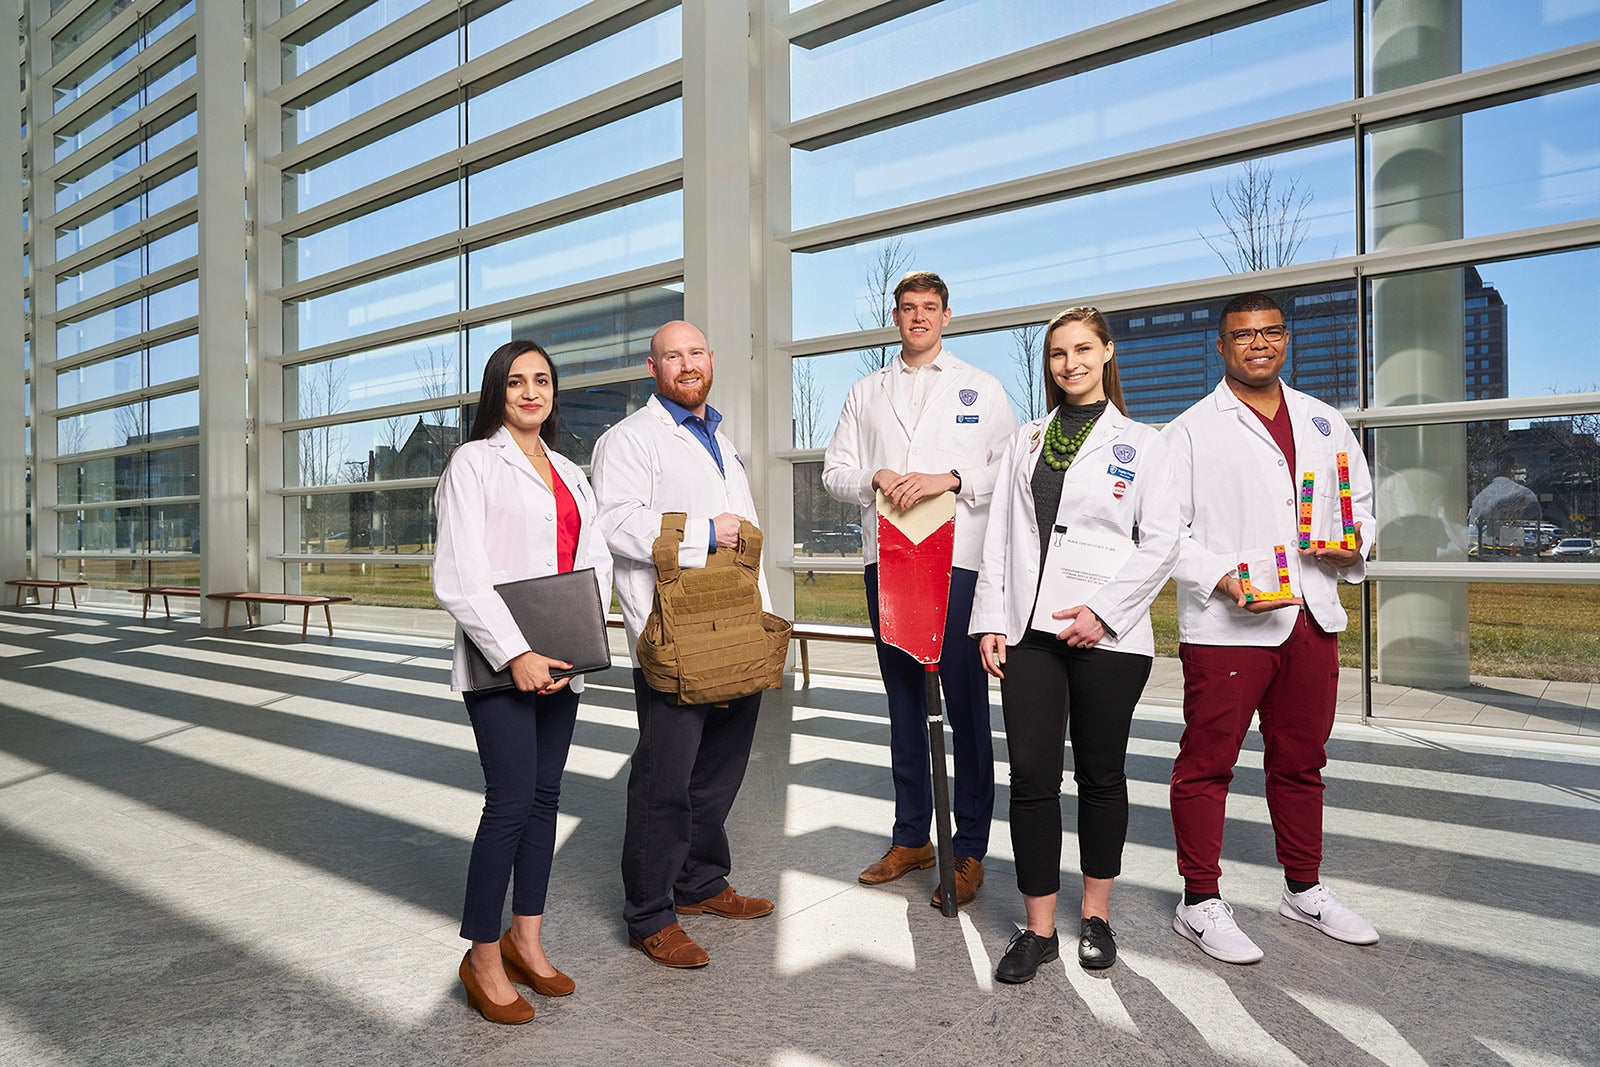 Five medical students in white coats and holding objects from their past work in front of a large set of windows.